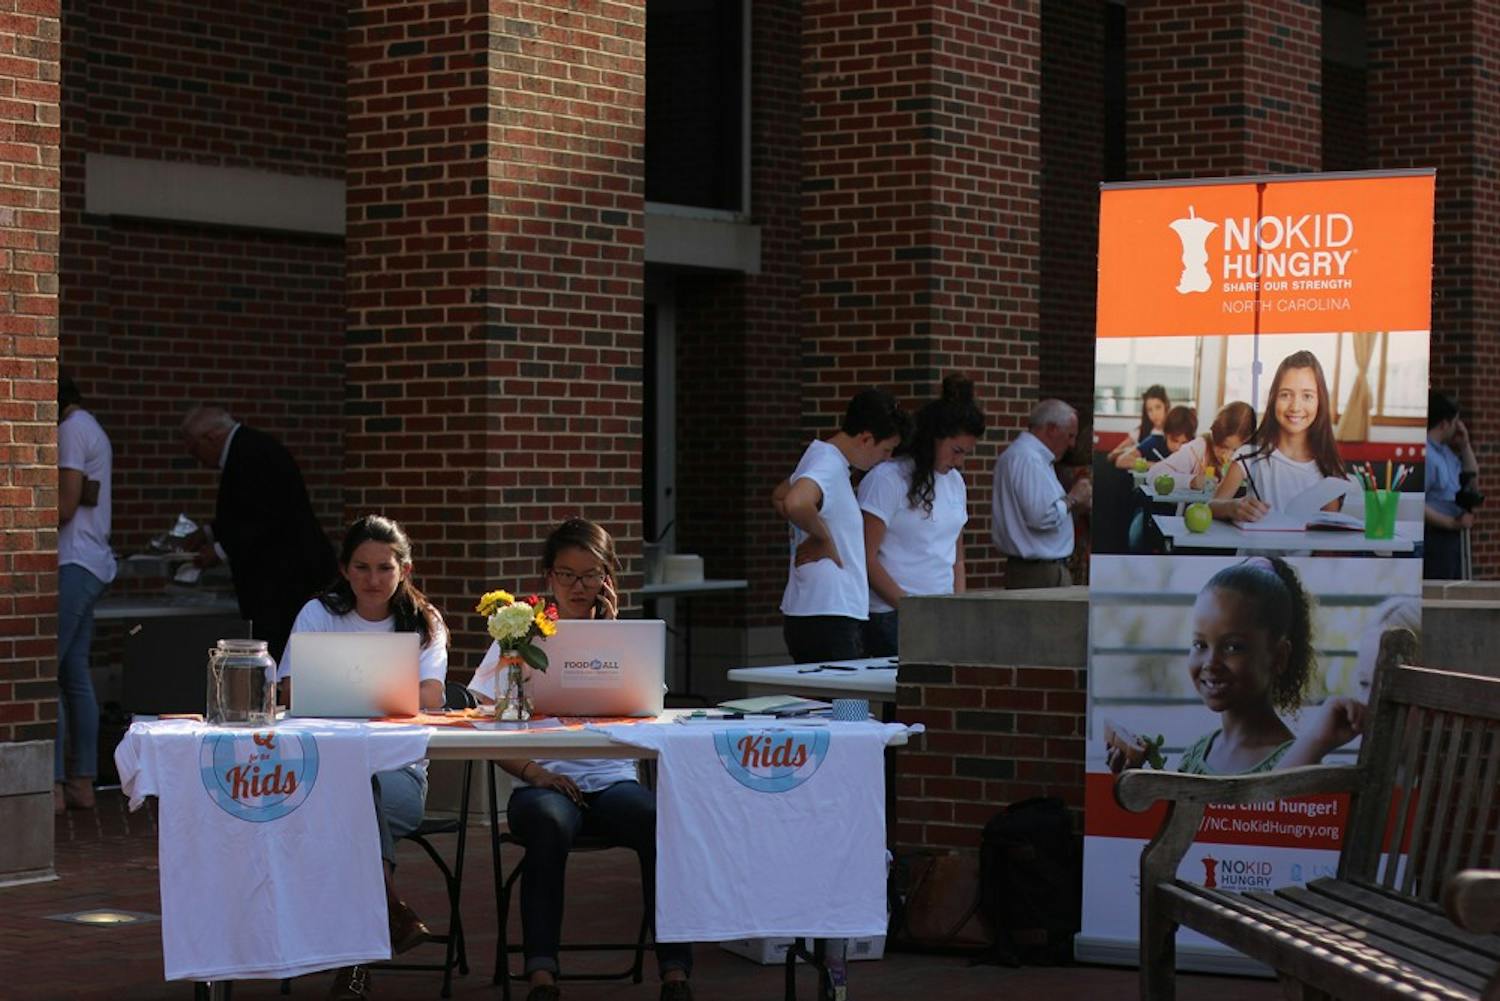 The campus organization, Q for the Kids, put on a fundraiser to raise funds for the “No Kid Hungry” project which is striving to alleviate hunger across North Carolina.